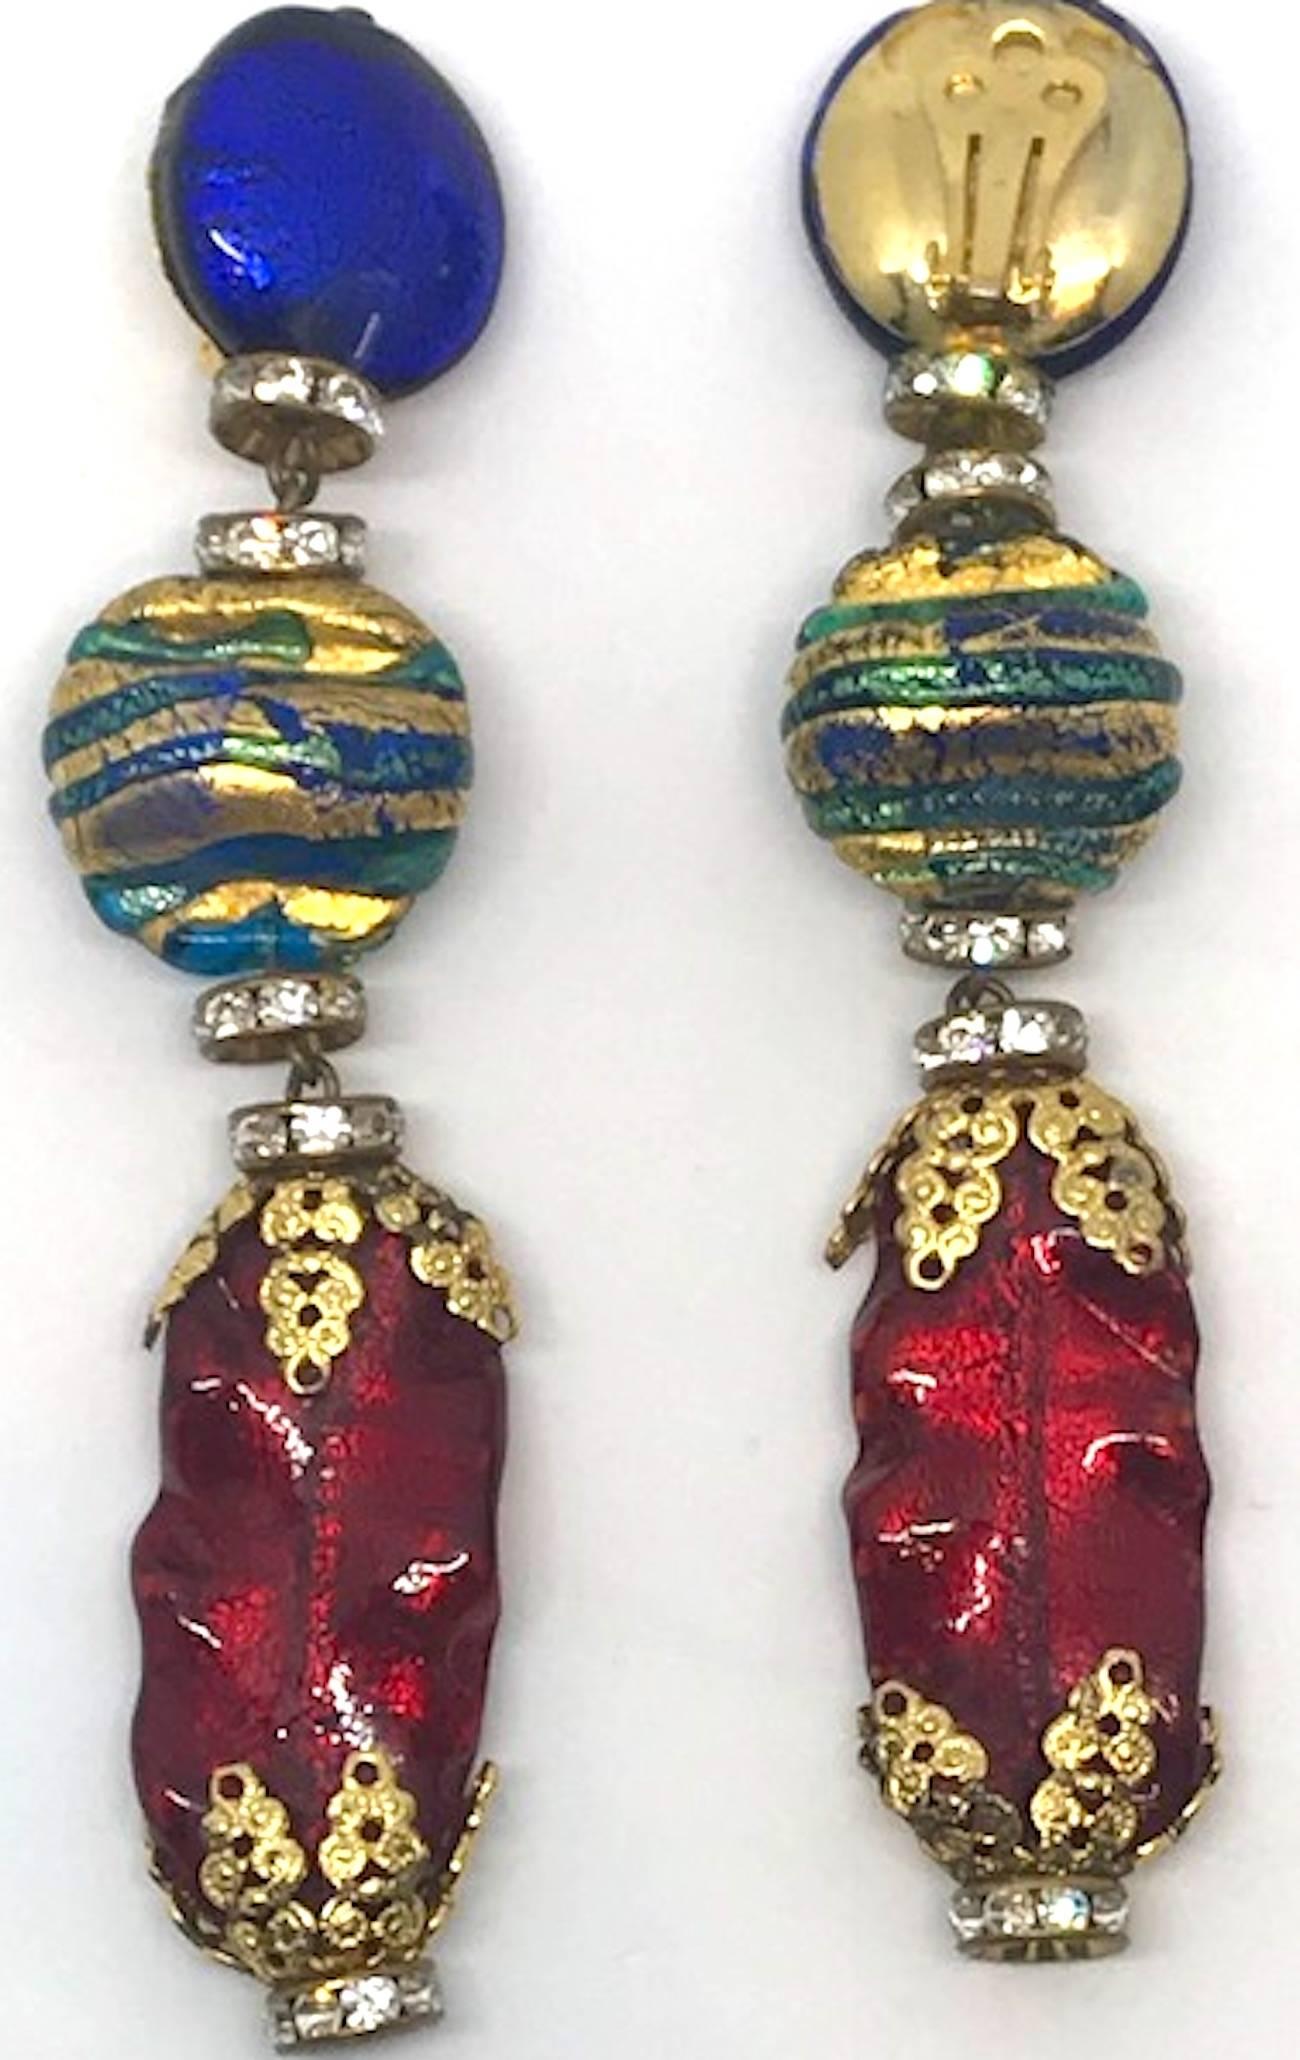 Venetian glass bead earrings from actress Elsa Martinelli's personal collection 1